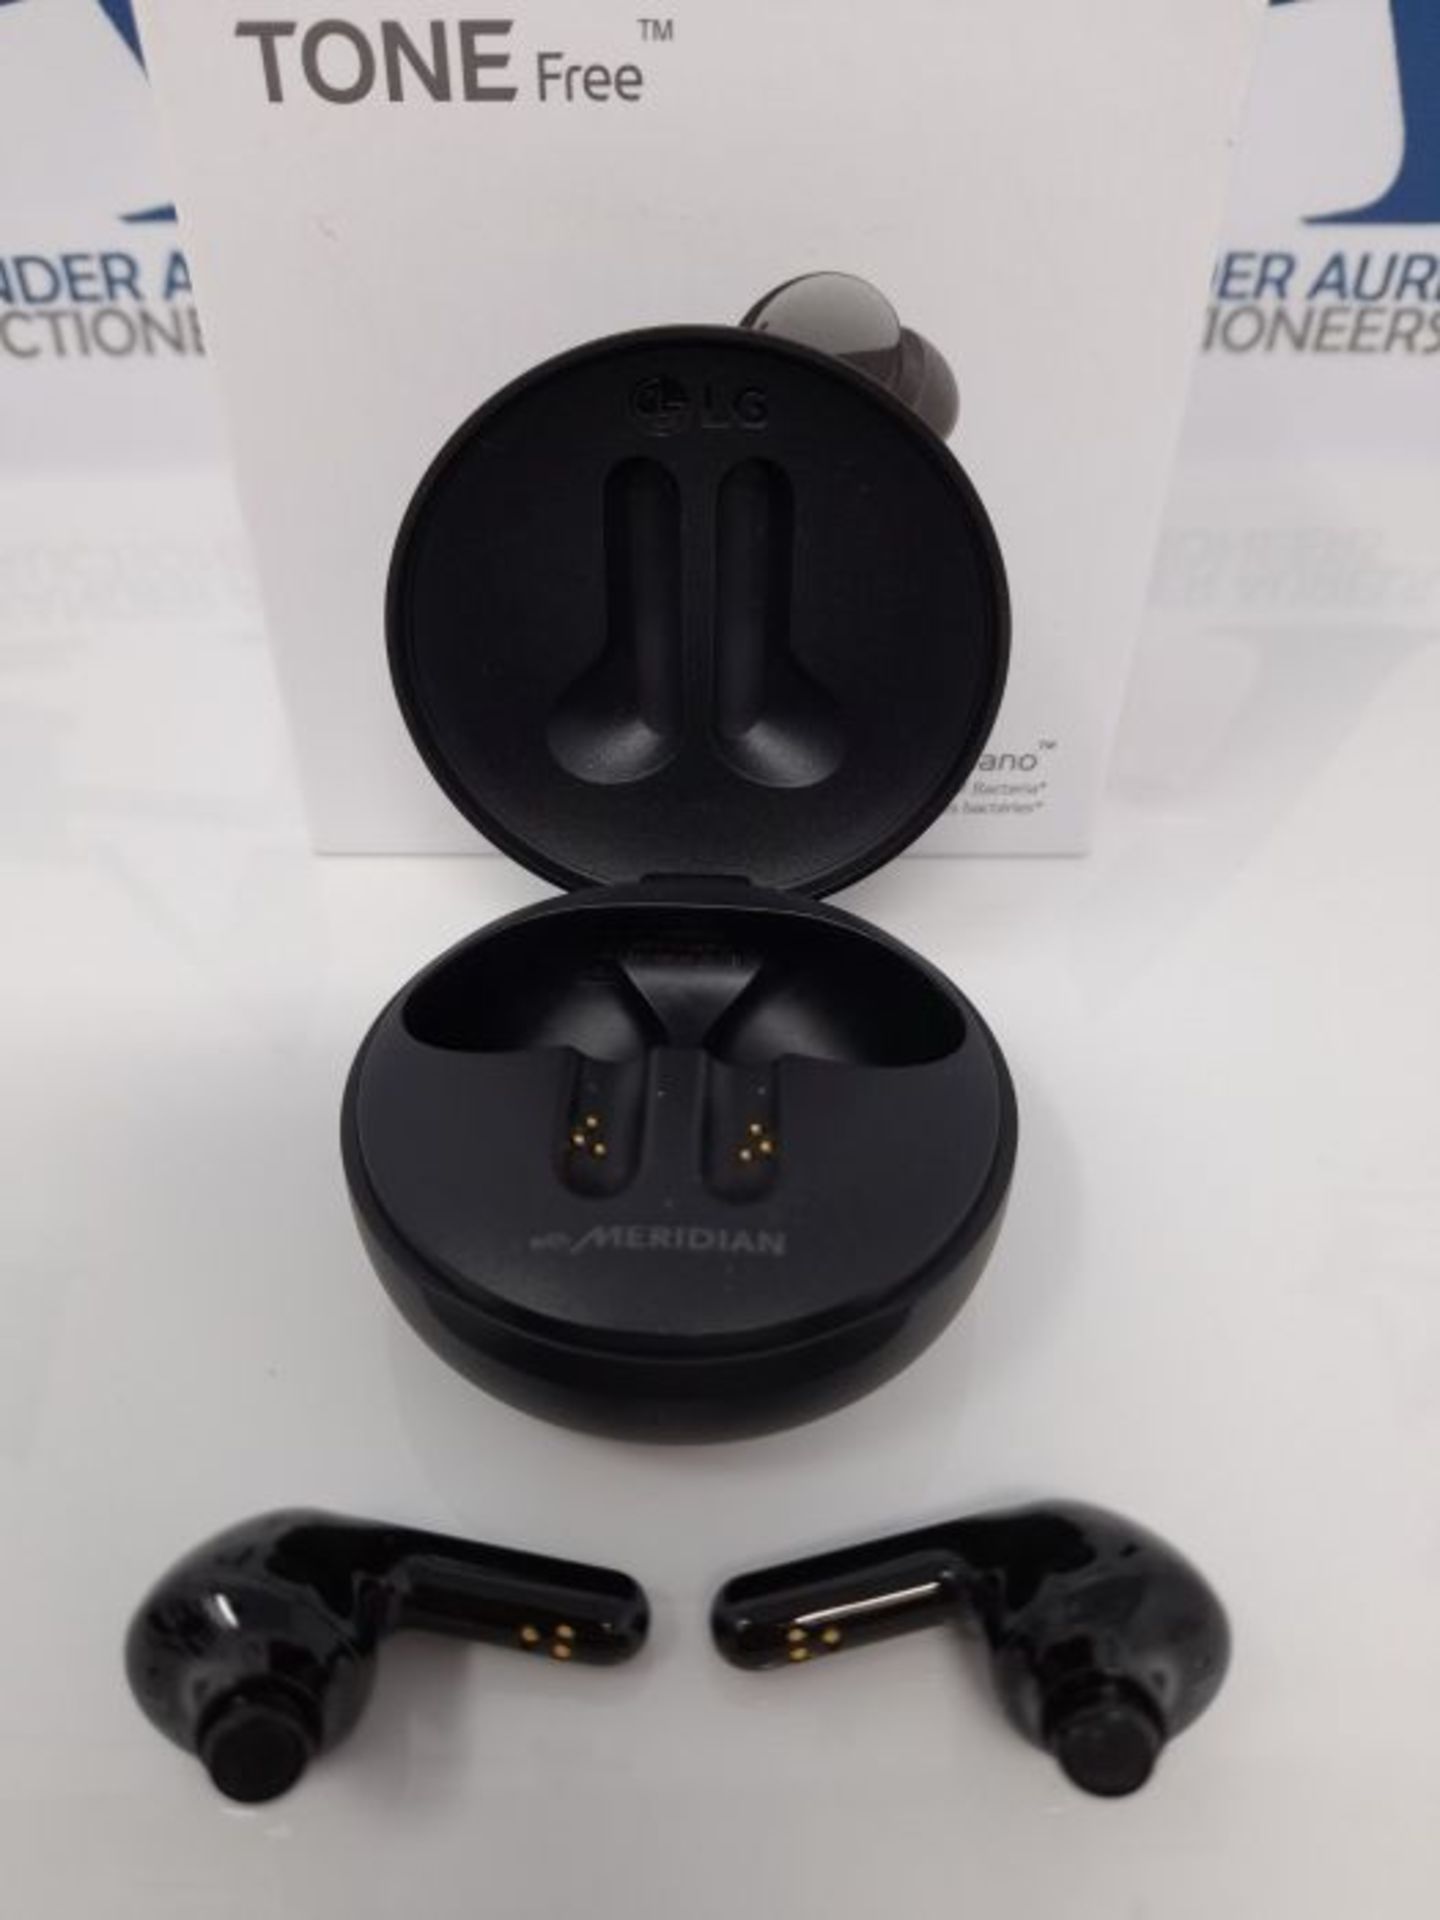 RRP £78.00 LG TONE Free FN6 True Wireless Bluetooth Earbuds with UVNano Wireless Charging Case, W - Image 3 of 3